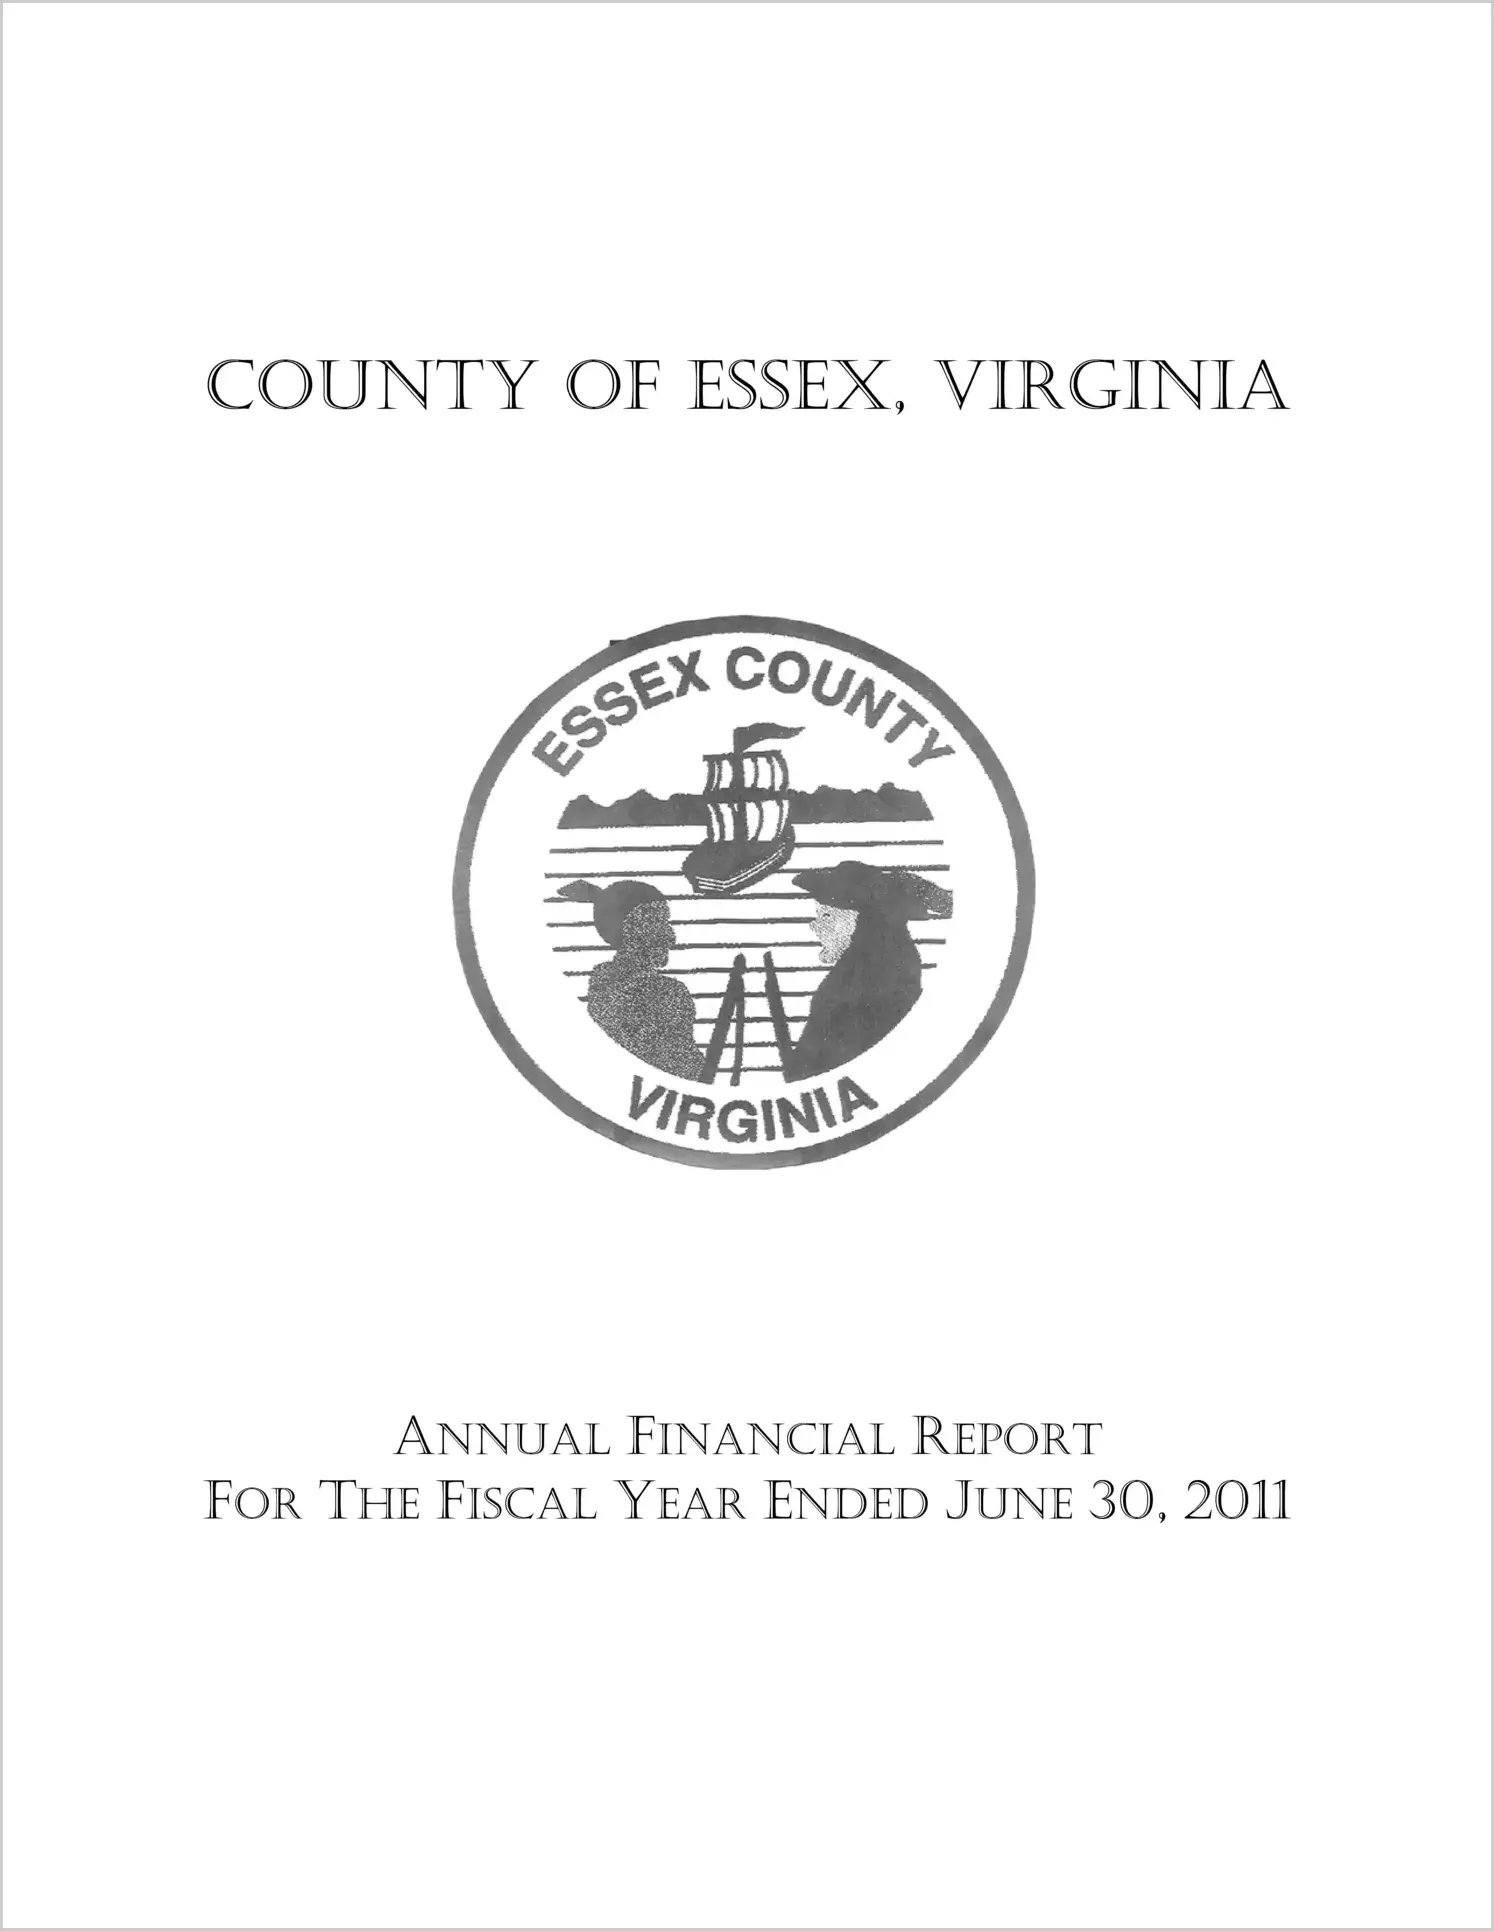 2011 Annual Financial Report for County of Essex